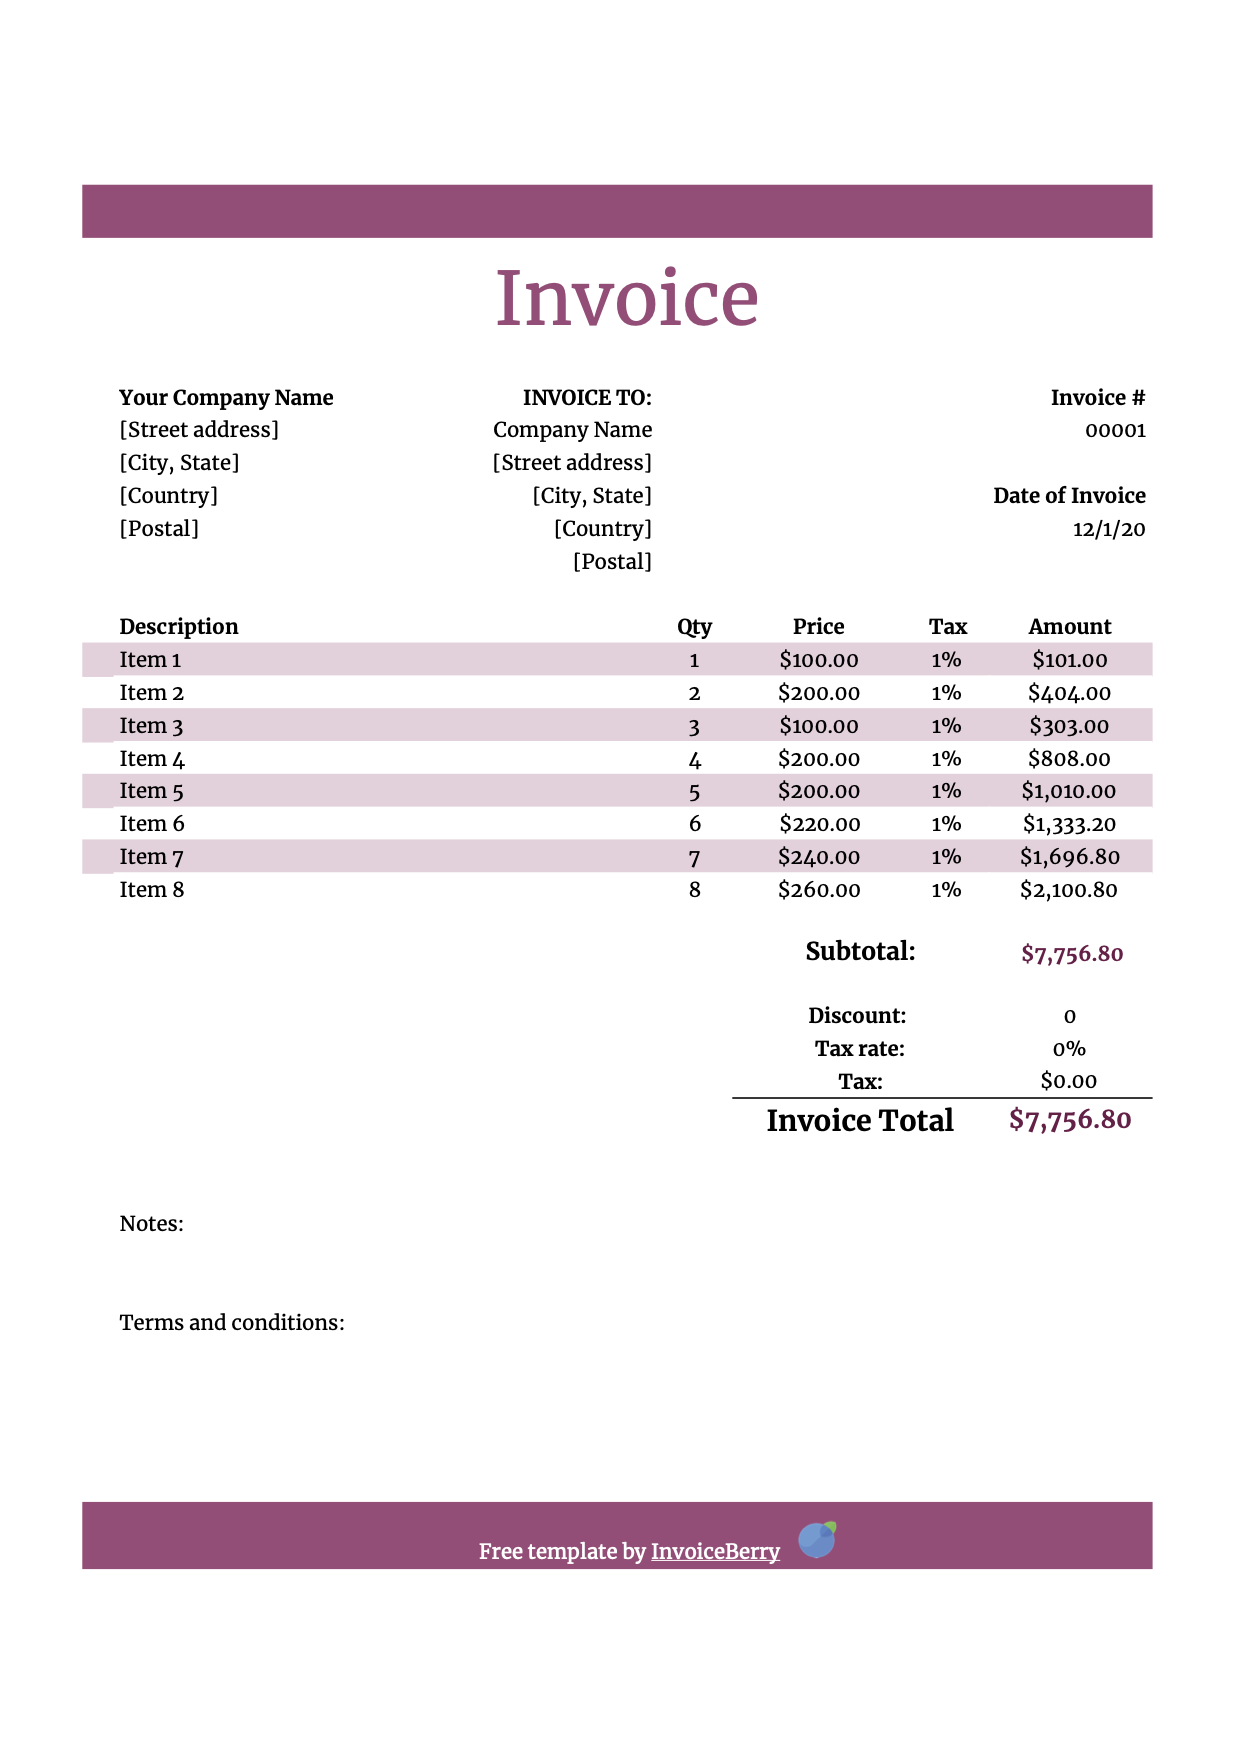 Free Numbers invoice templates - get invoice templates for Mac Pertaining To Invoice Template For Pages